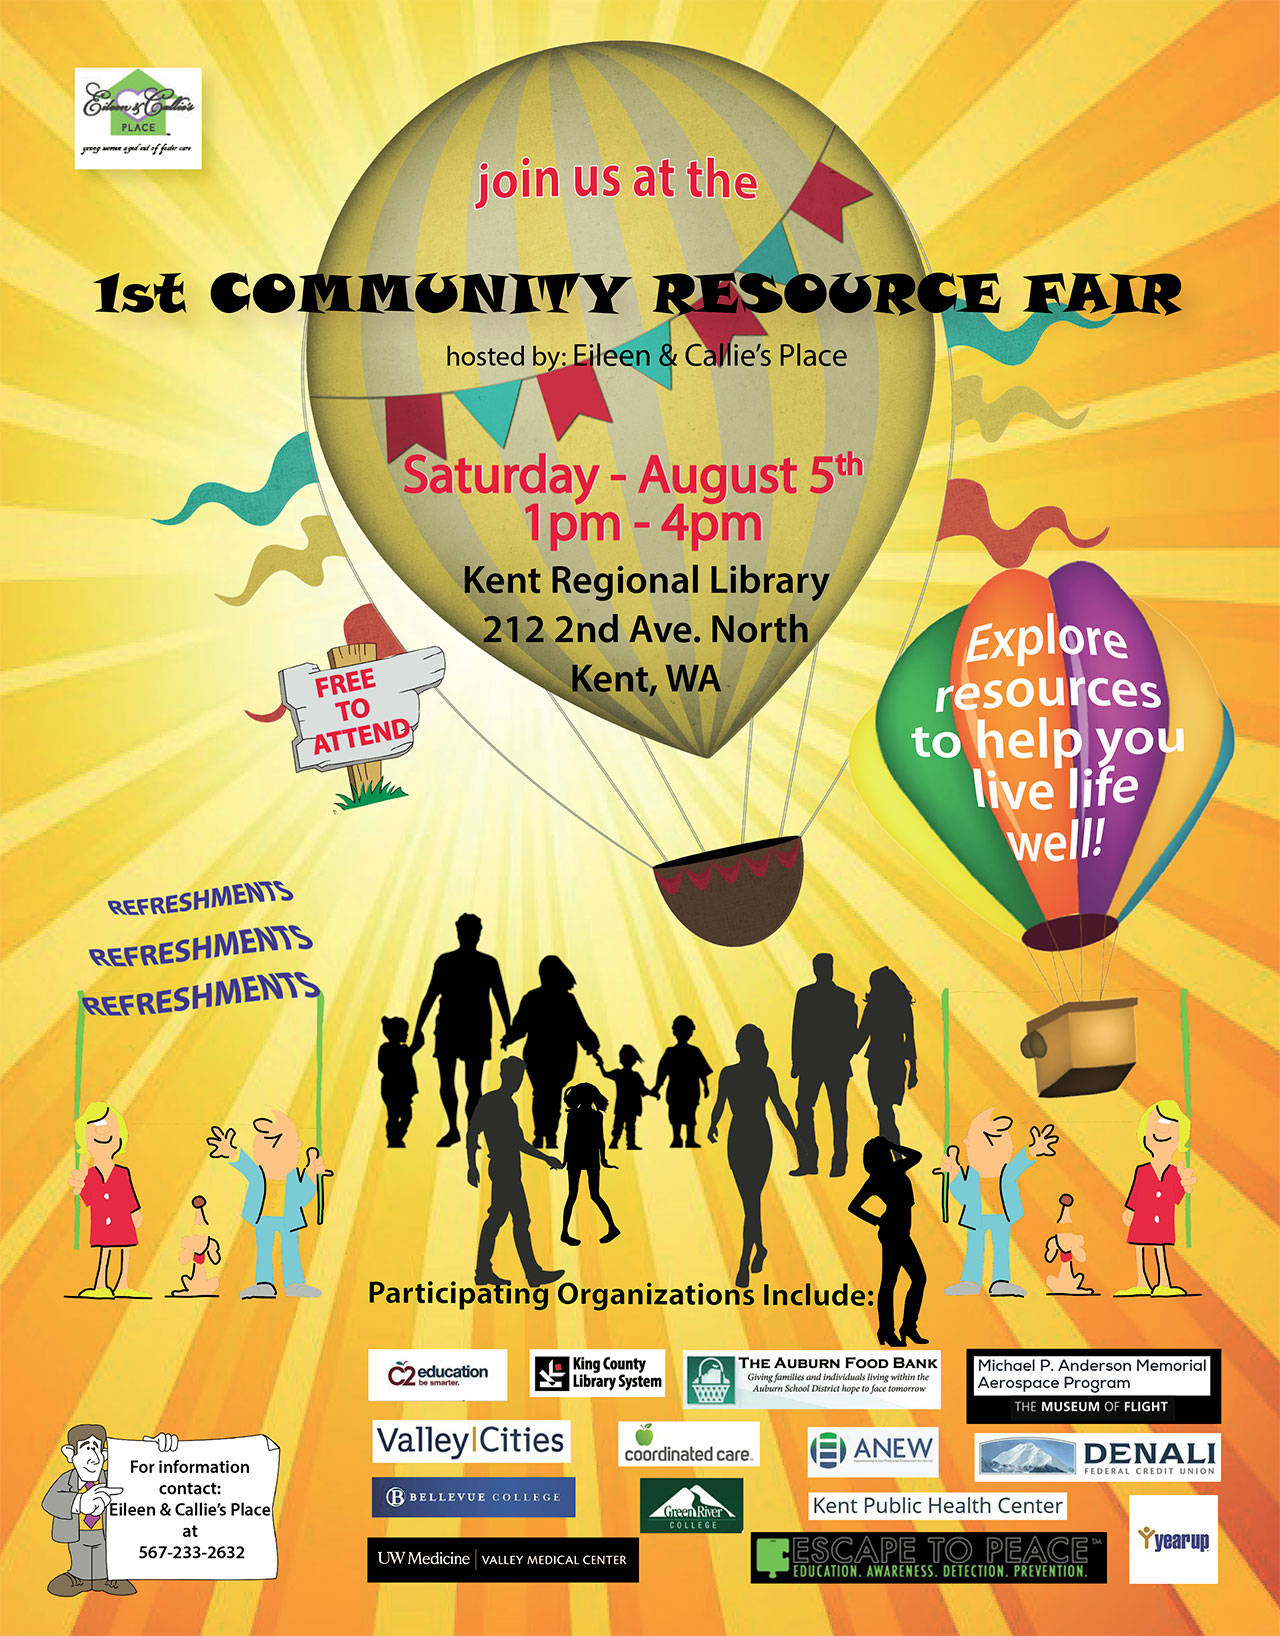 Kent Regional Library to host Community Resource Fair